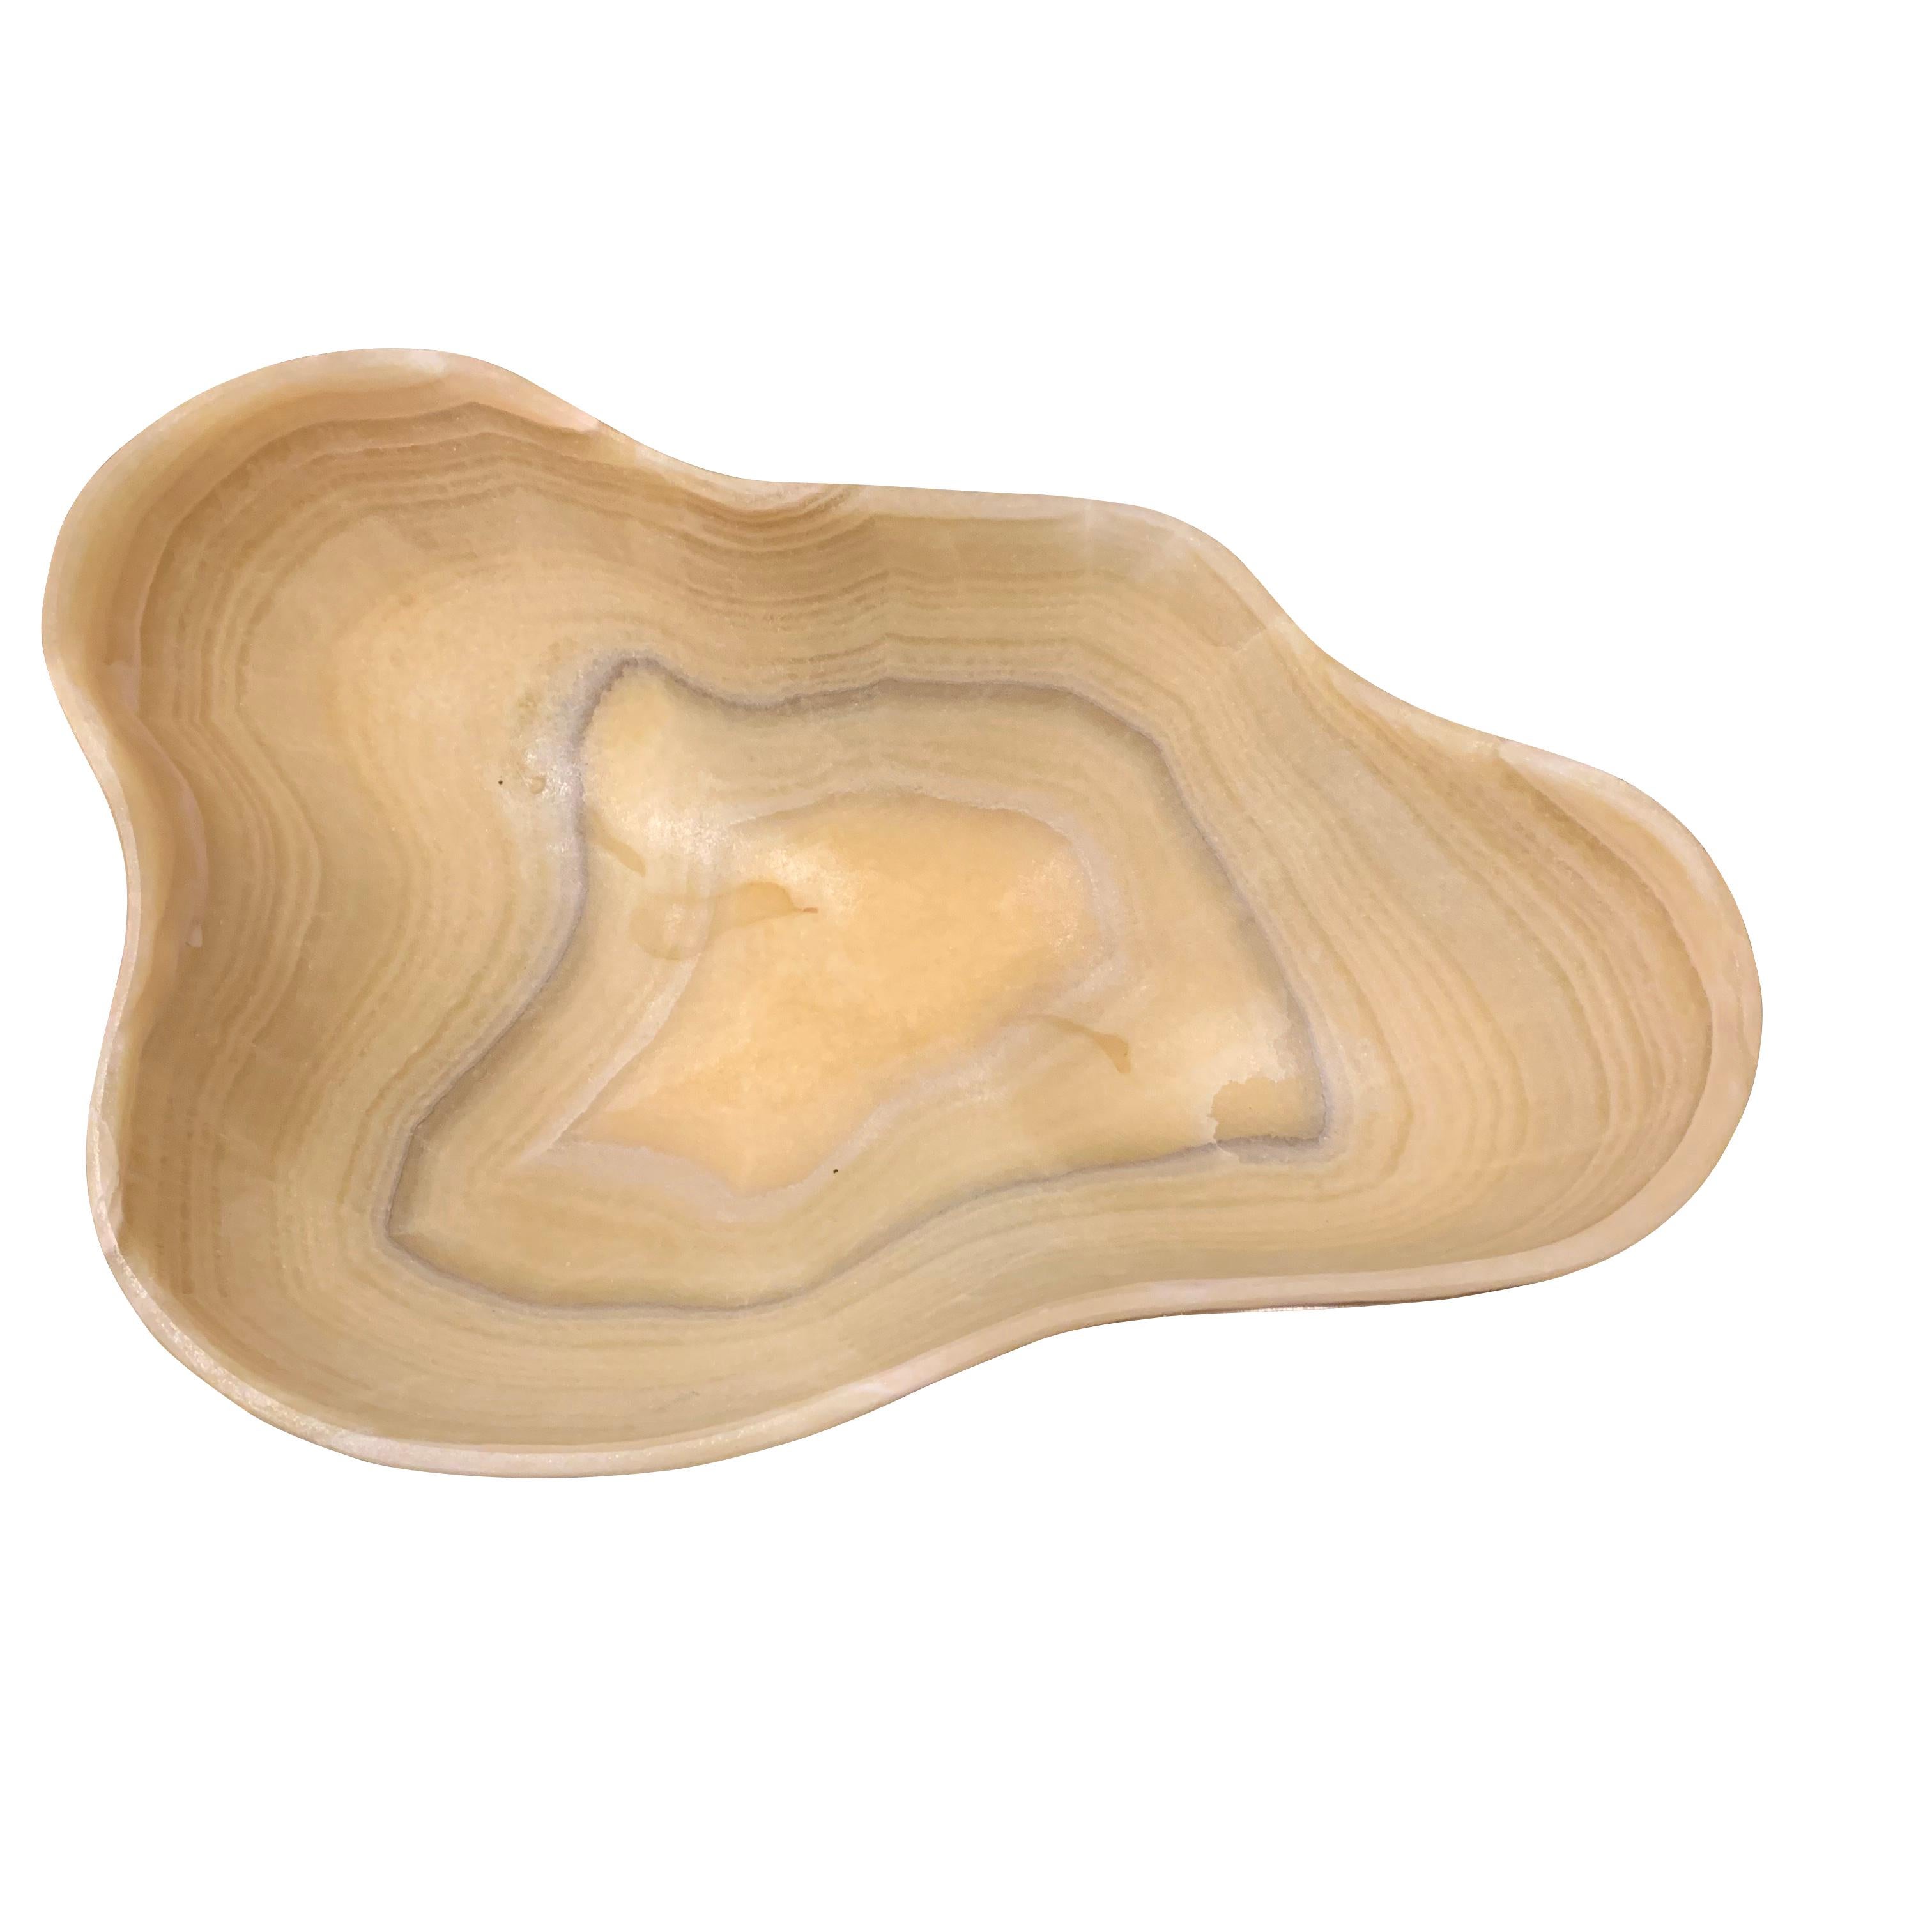 Contemporary Brazilian beautifully carved onyx bowl
Organic free form shape
Shades of yellow, cream and grey.